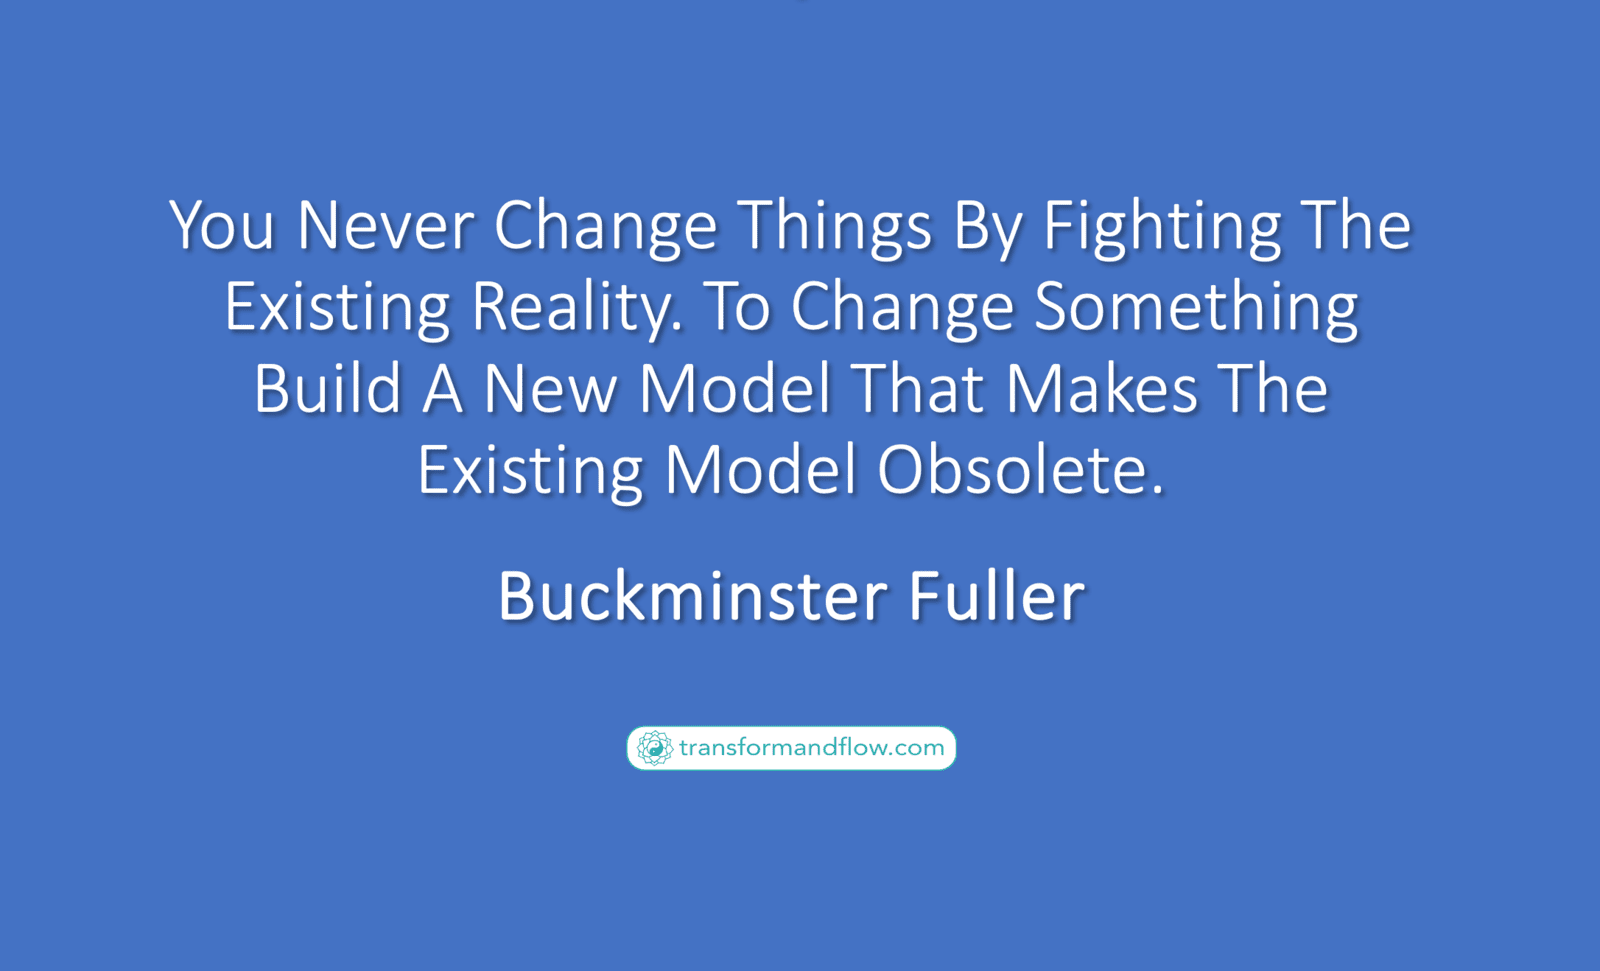 True Change is Making the Existing Model Obsolete